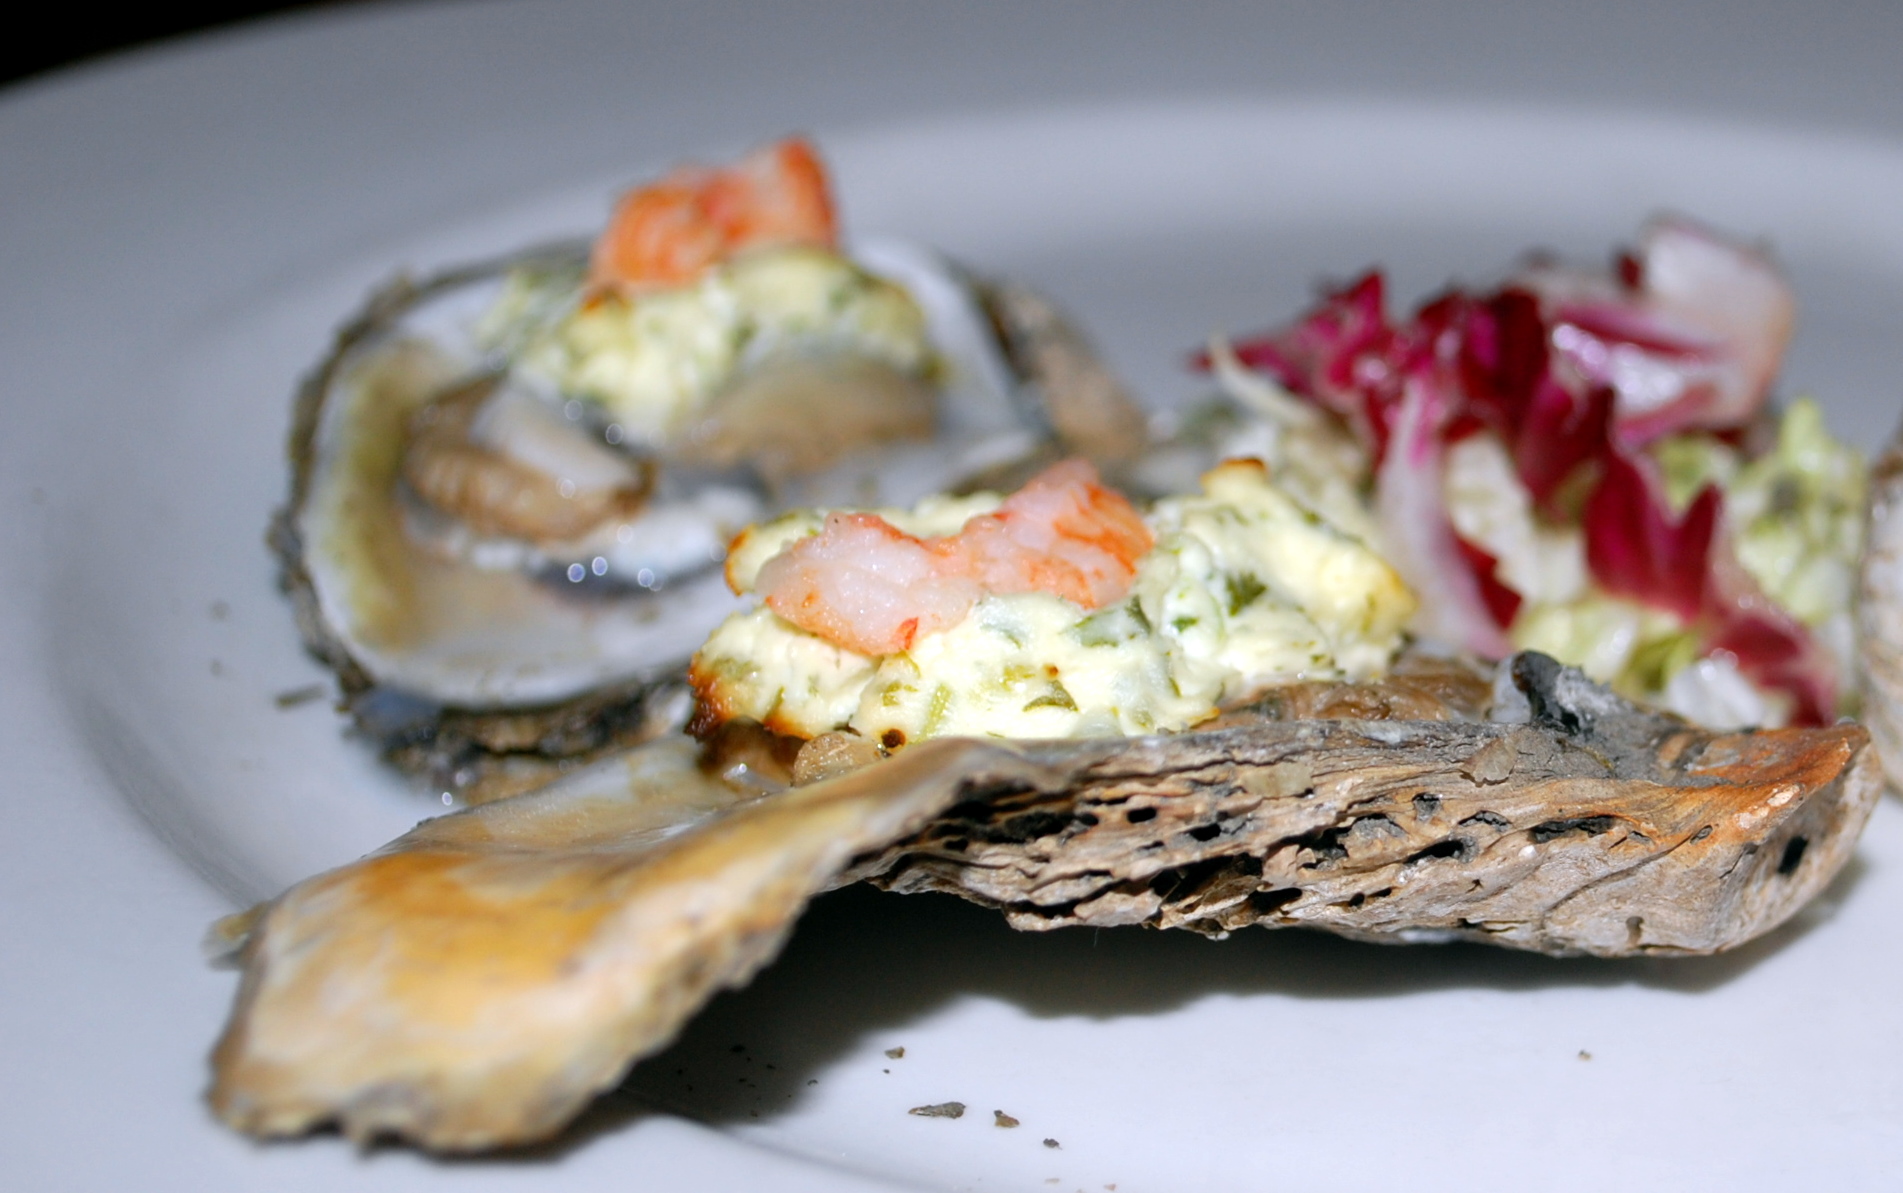 Shared appetizer: Baked Oysters Langastino. 4 oysters with baby lobster tail and boursin cheese